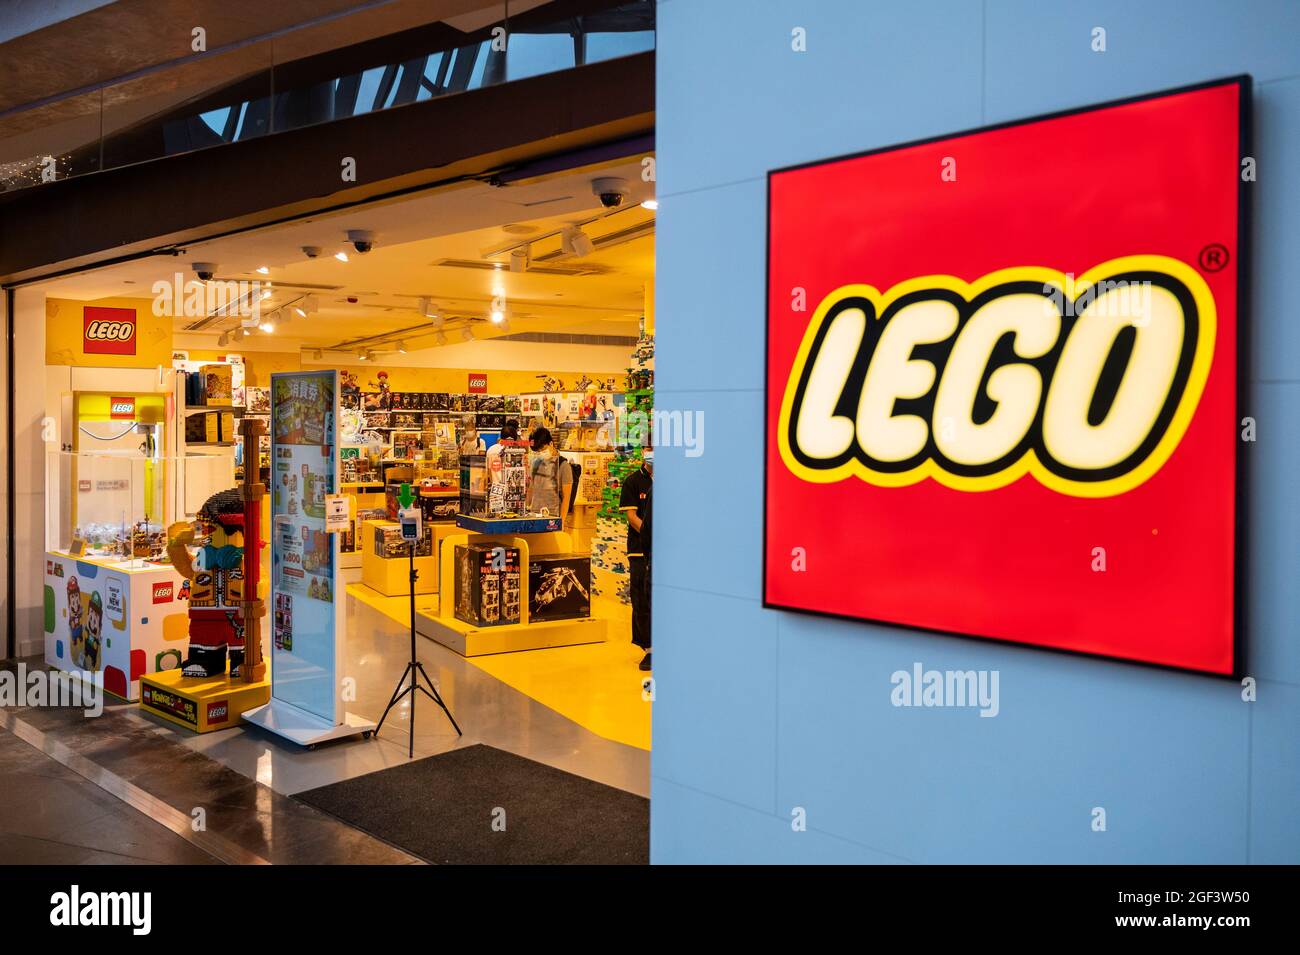 Danish toy brand Lego official store seen in Hong Kong Stock Photo - Alamy